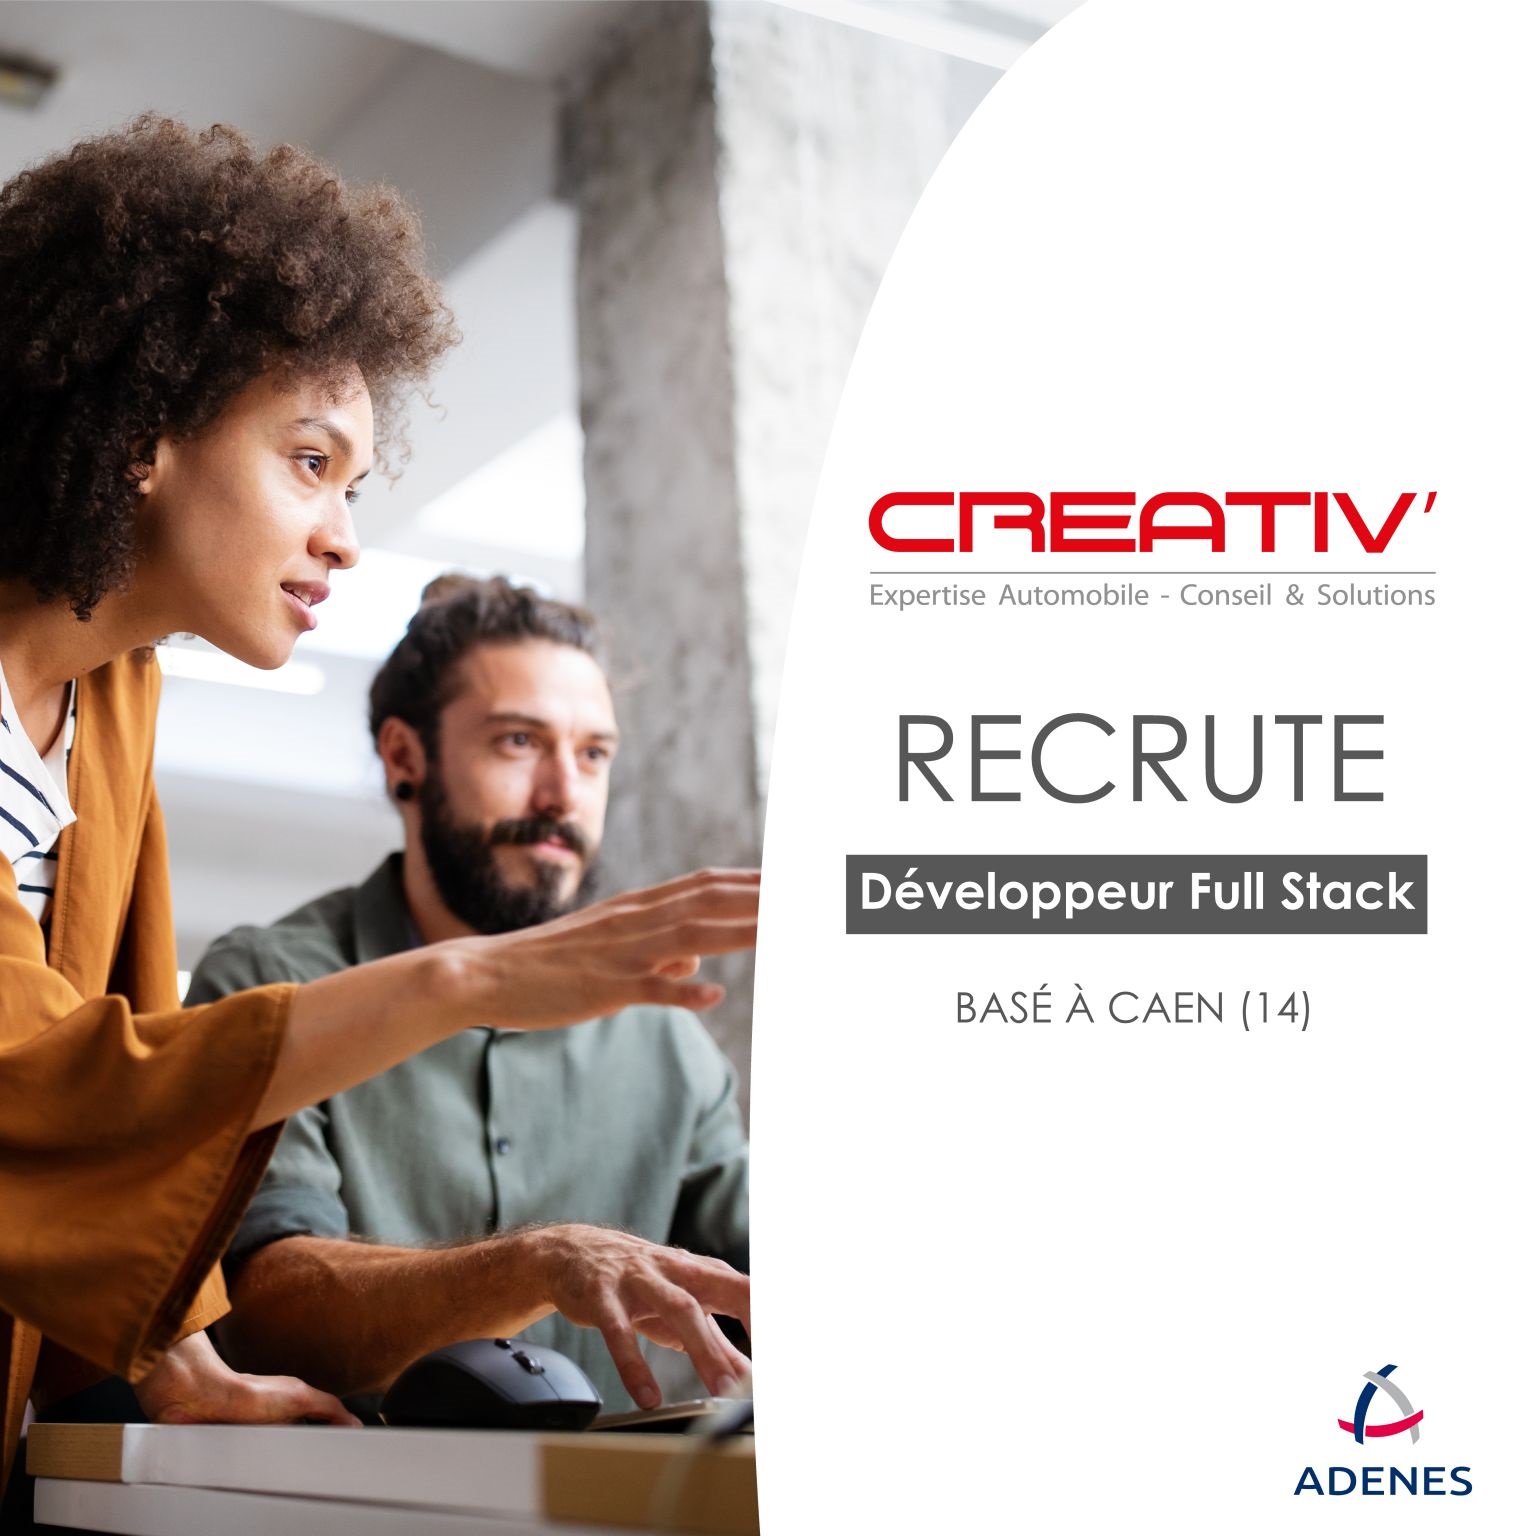 You are currently viewing #JoinAdenes – CREATIV’ GROUP is recruiting a Full Stack Developer!